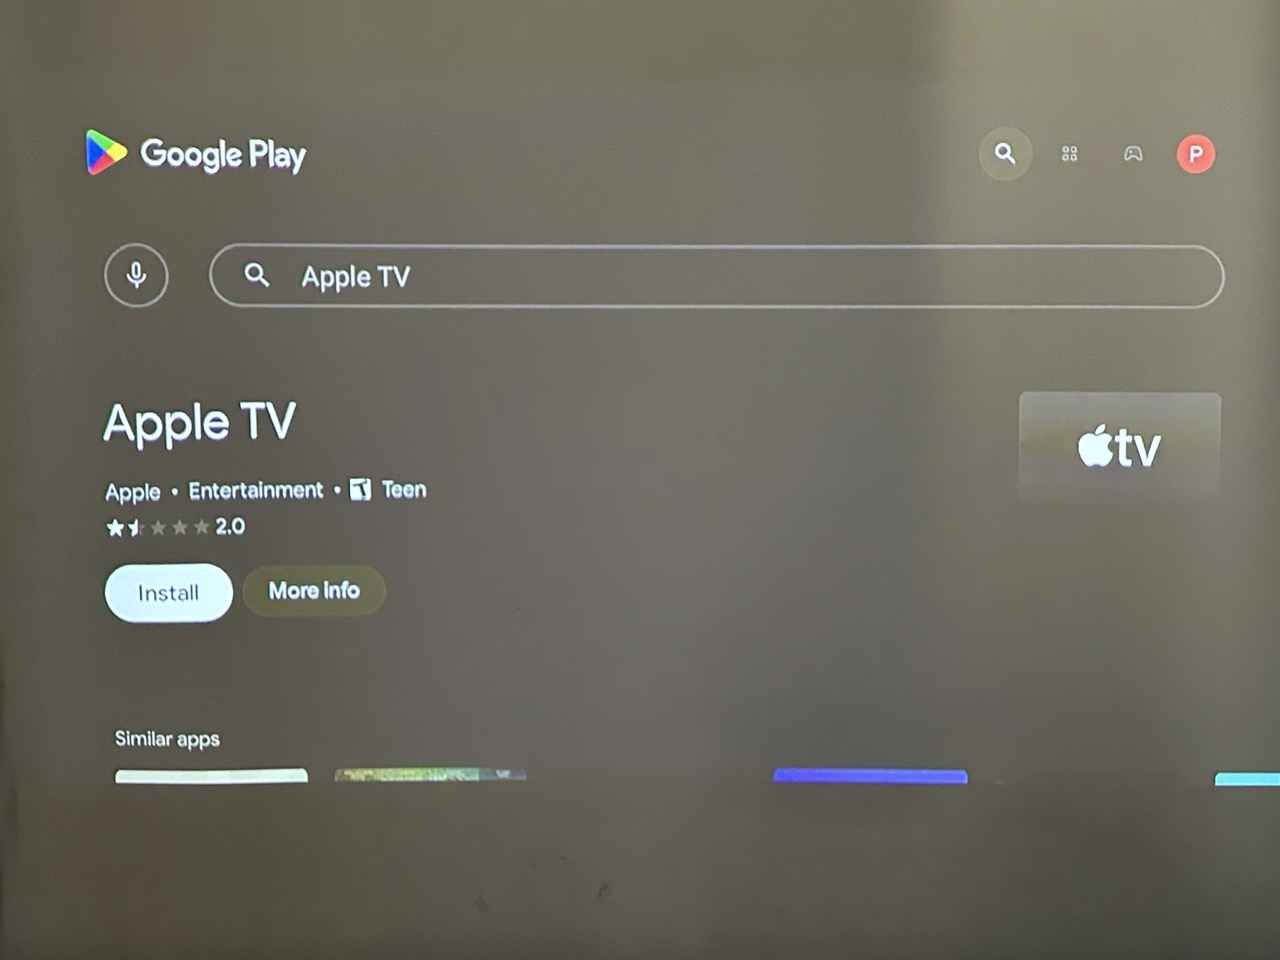 install apple tv app option is highlighted on the nebula projector